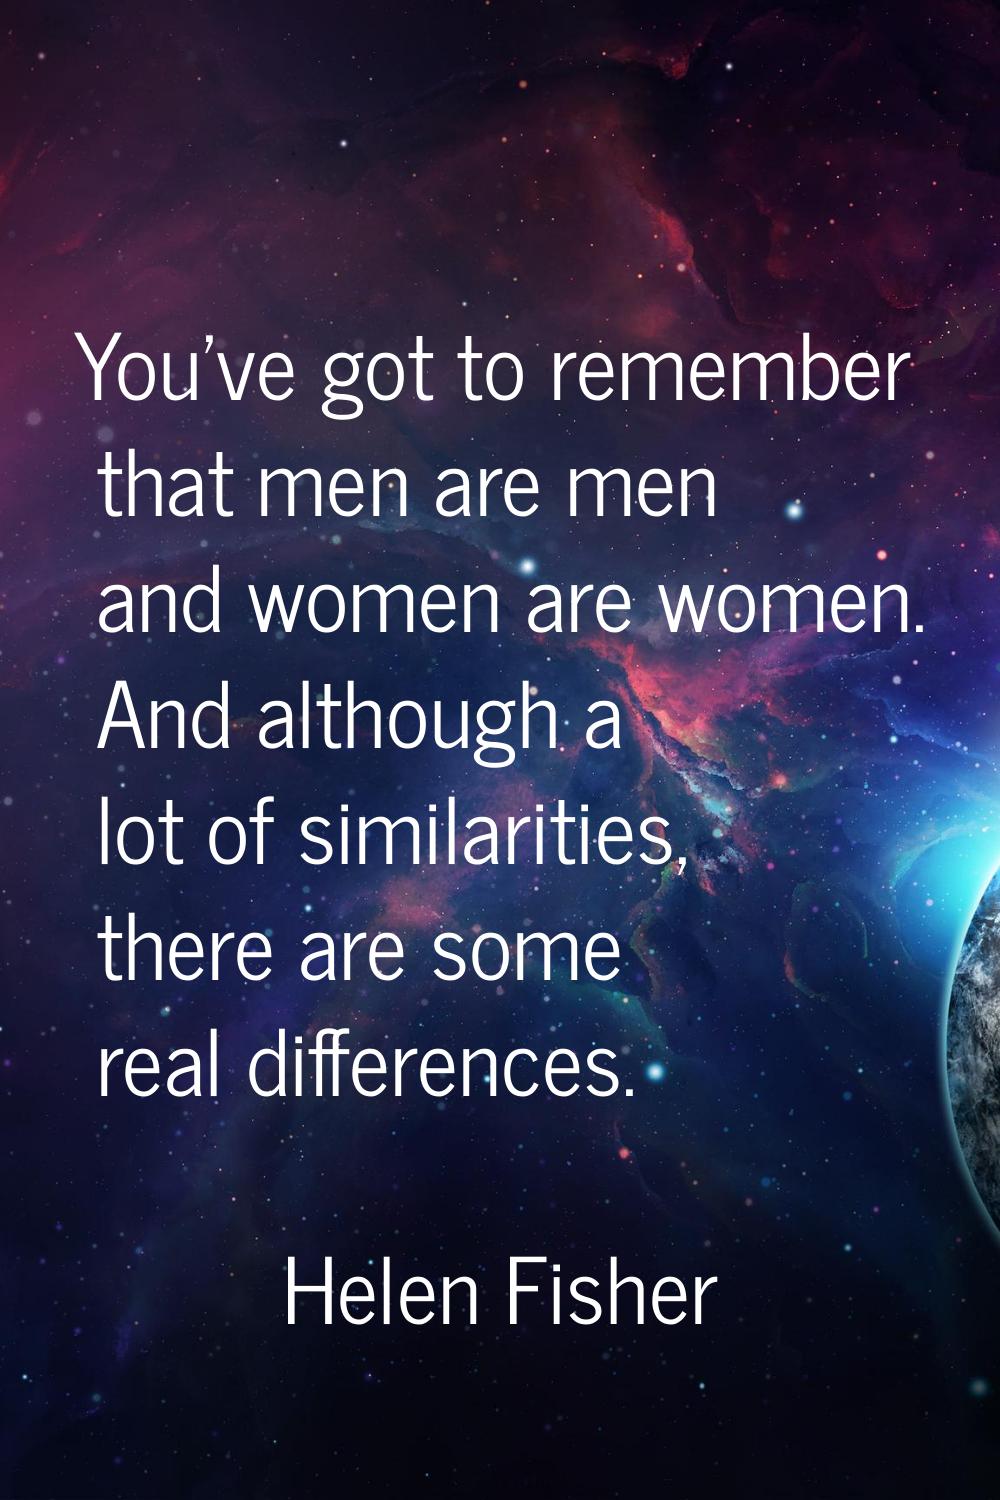 You've got to remember that men are men and women are women. And although a lot of similarities, th